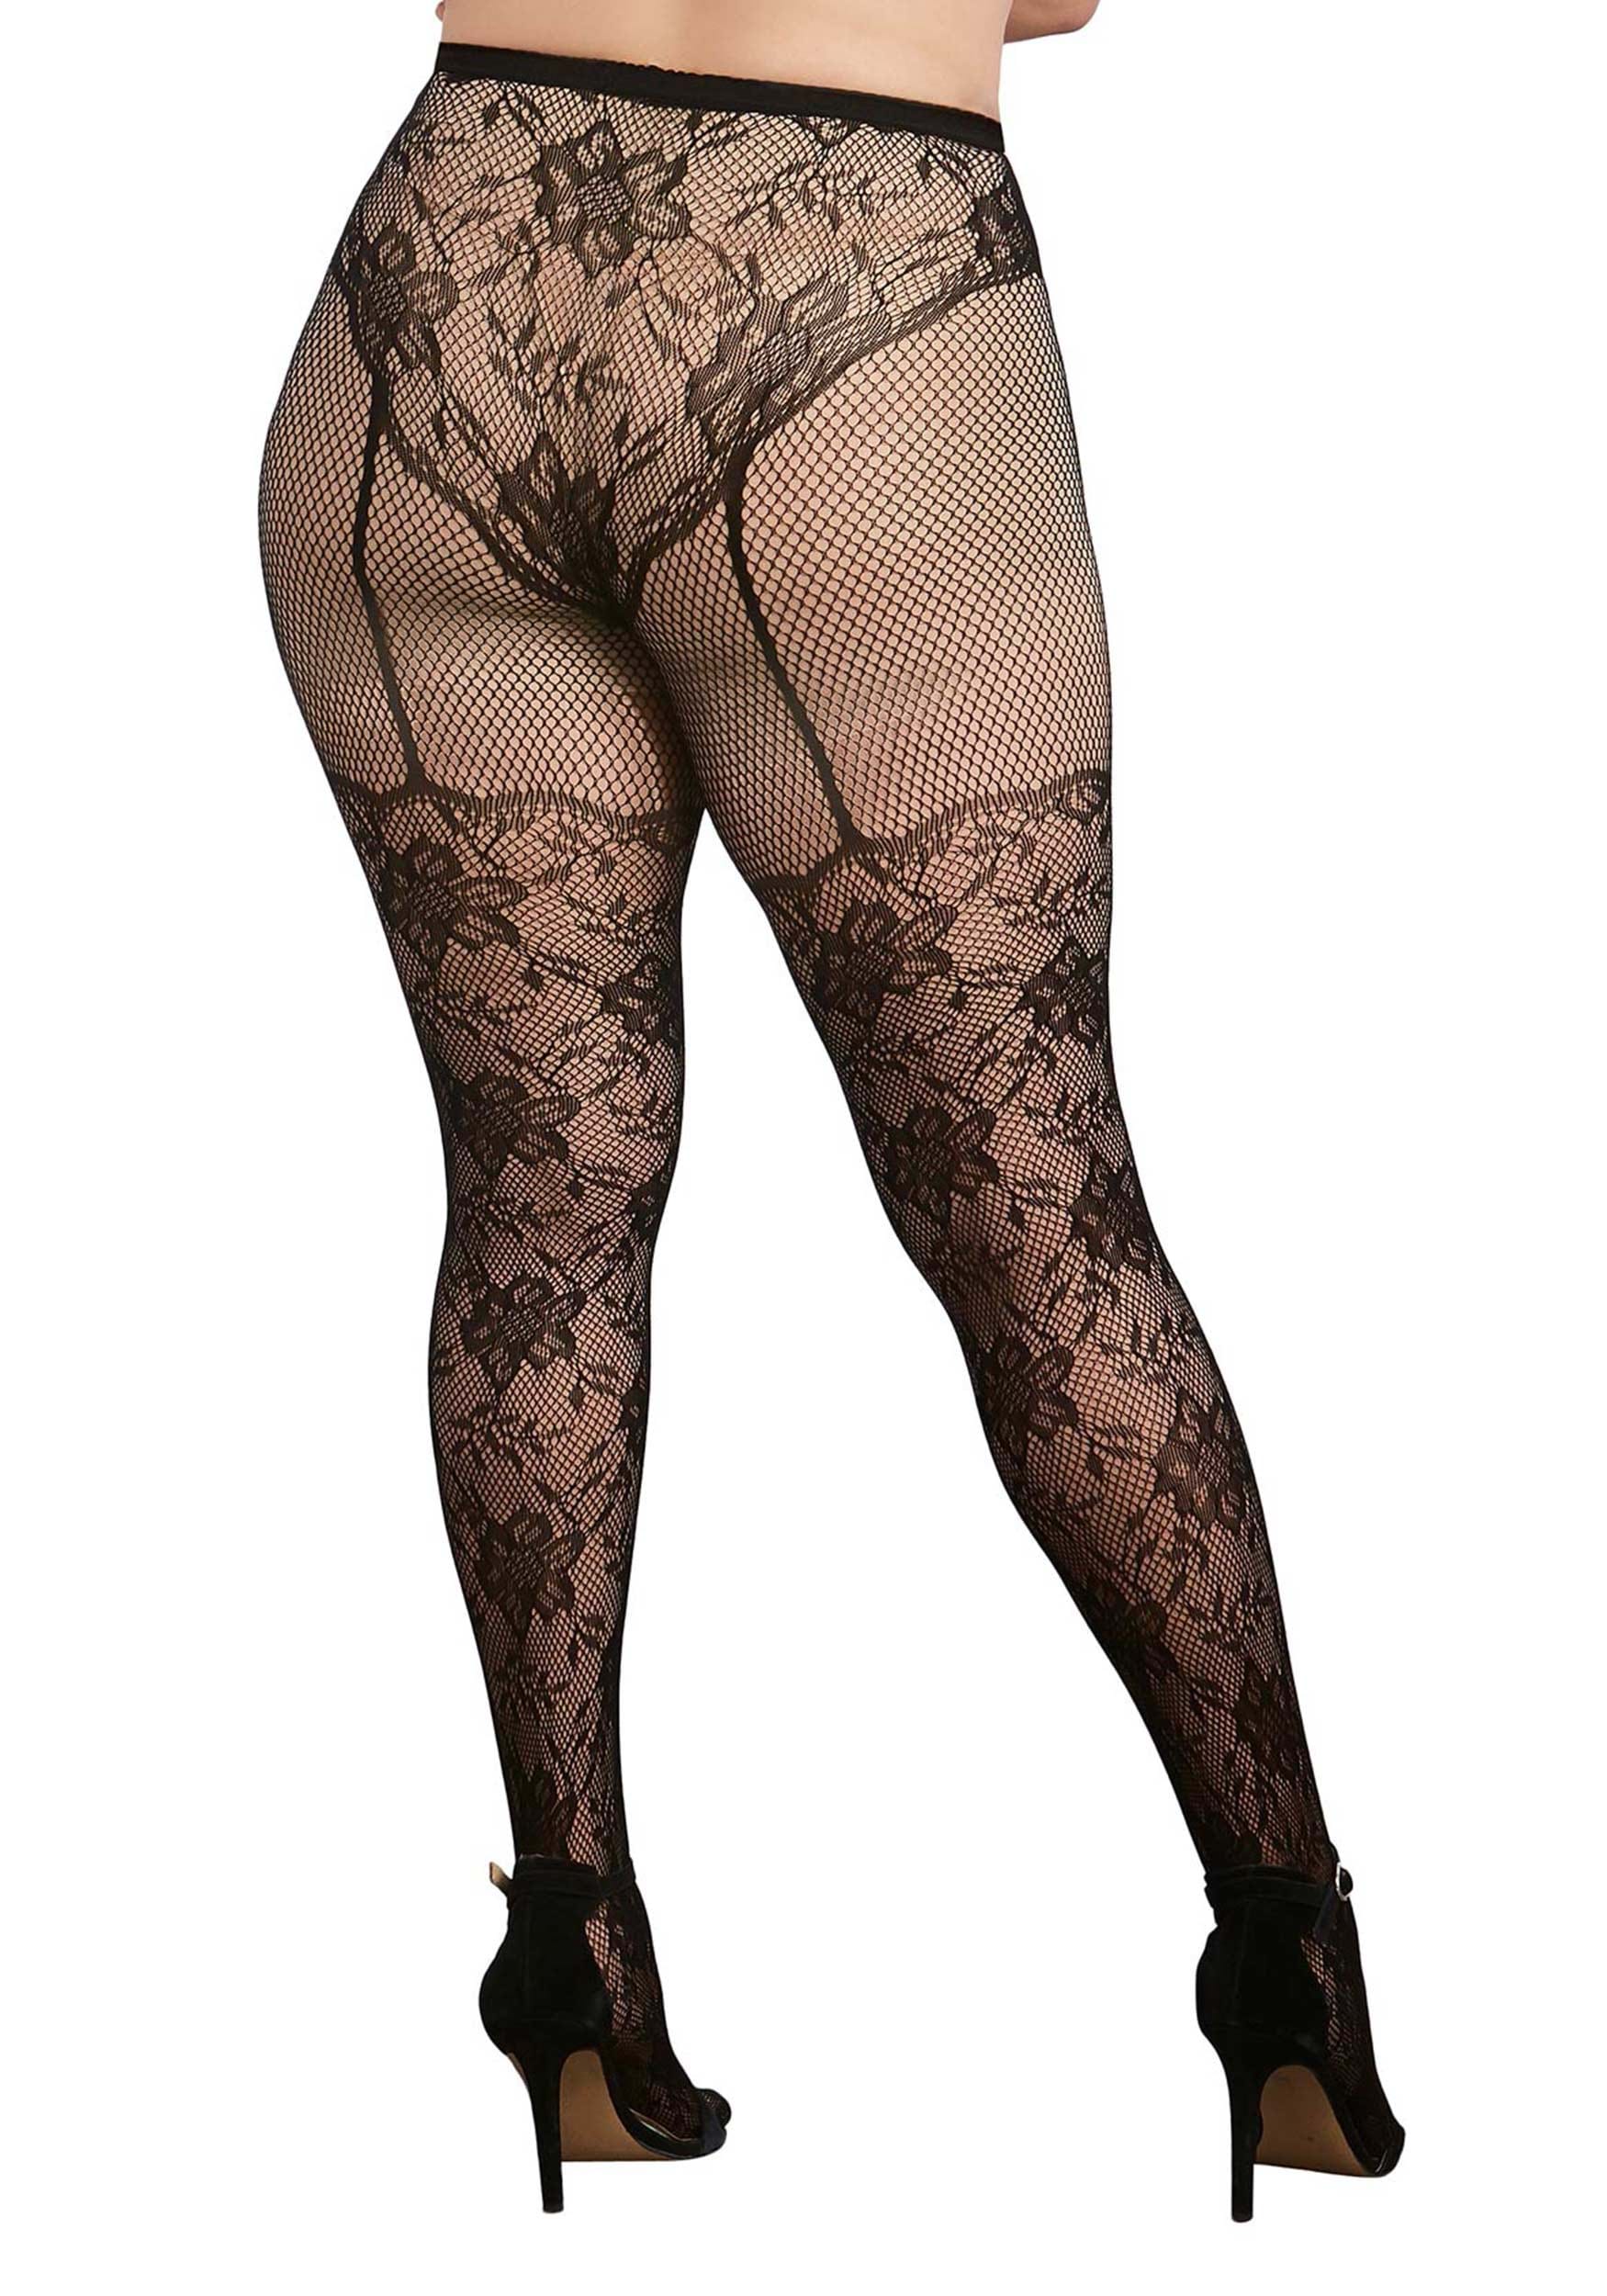 Black Lace Fishnet Pantyhose With High-Waisted Lace Panty And Thigh High Design